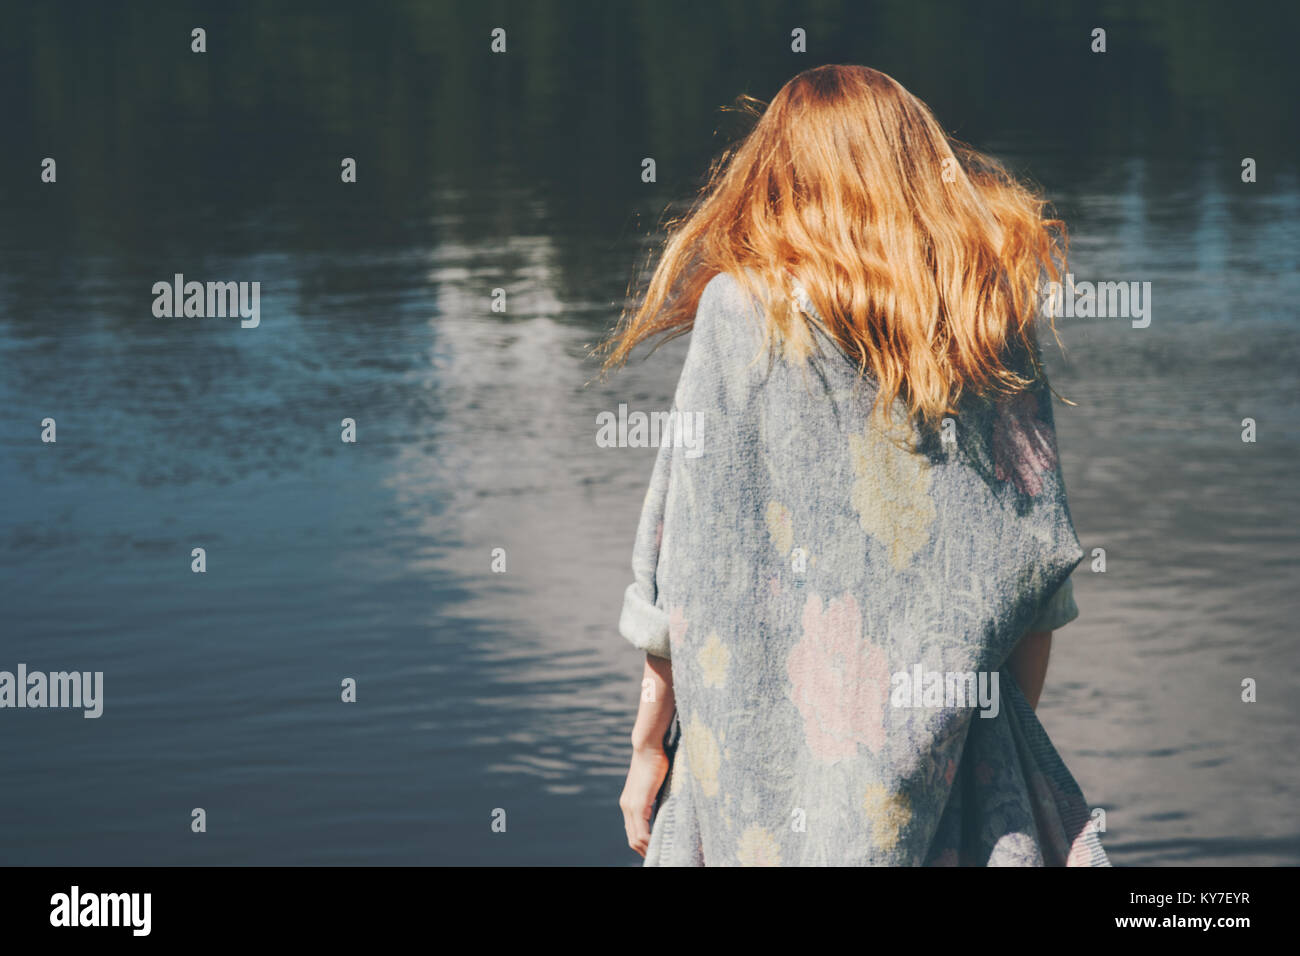 Young woman walking at river alone wearing long cardigan Fashion Lifestyle emotions concept red hair on wind Stock Photo